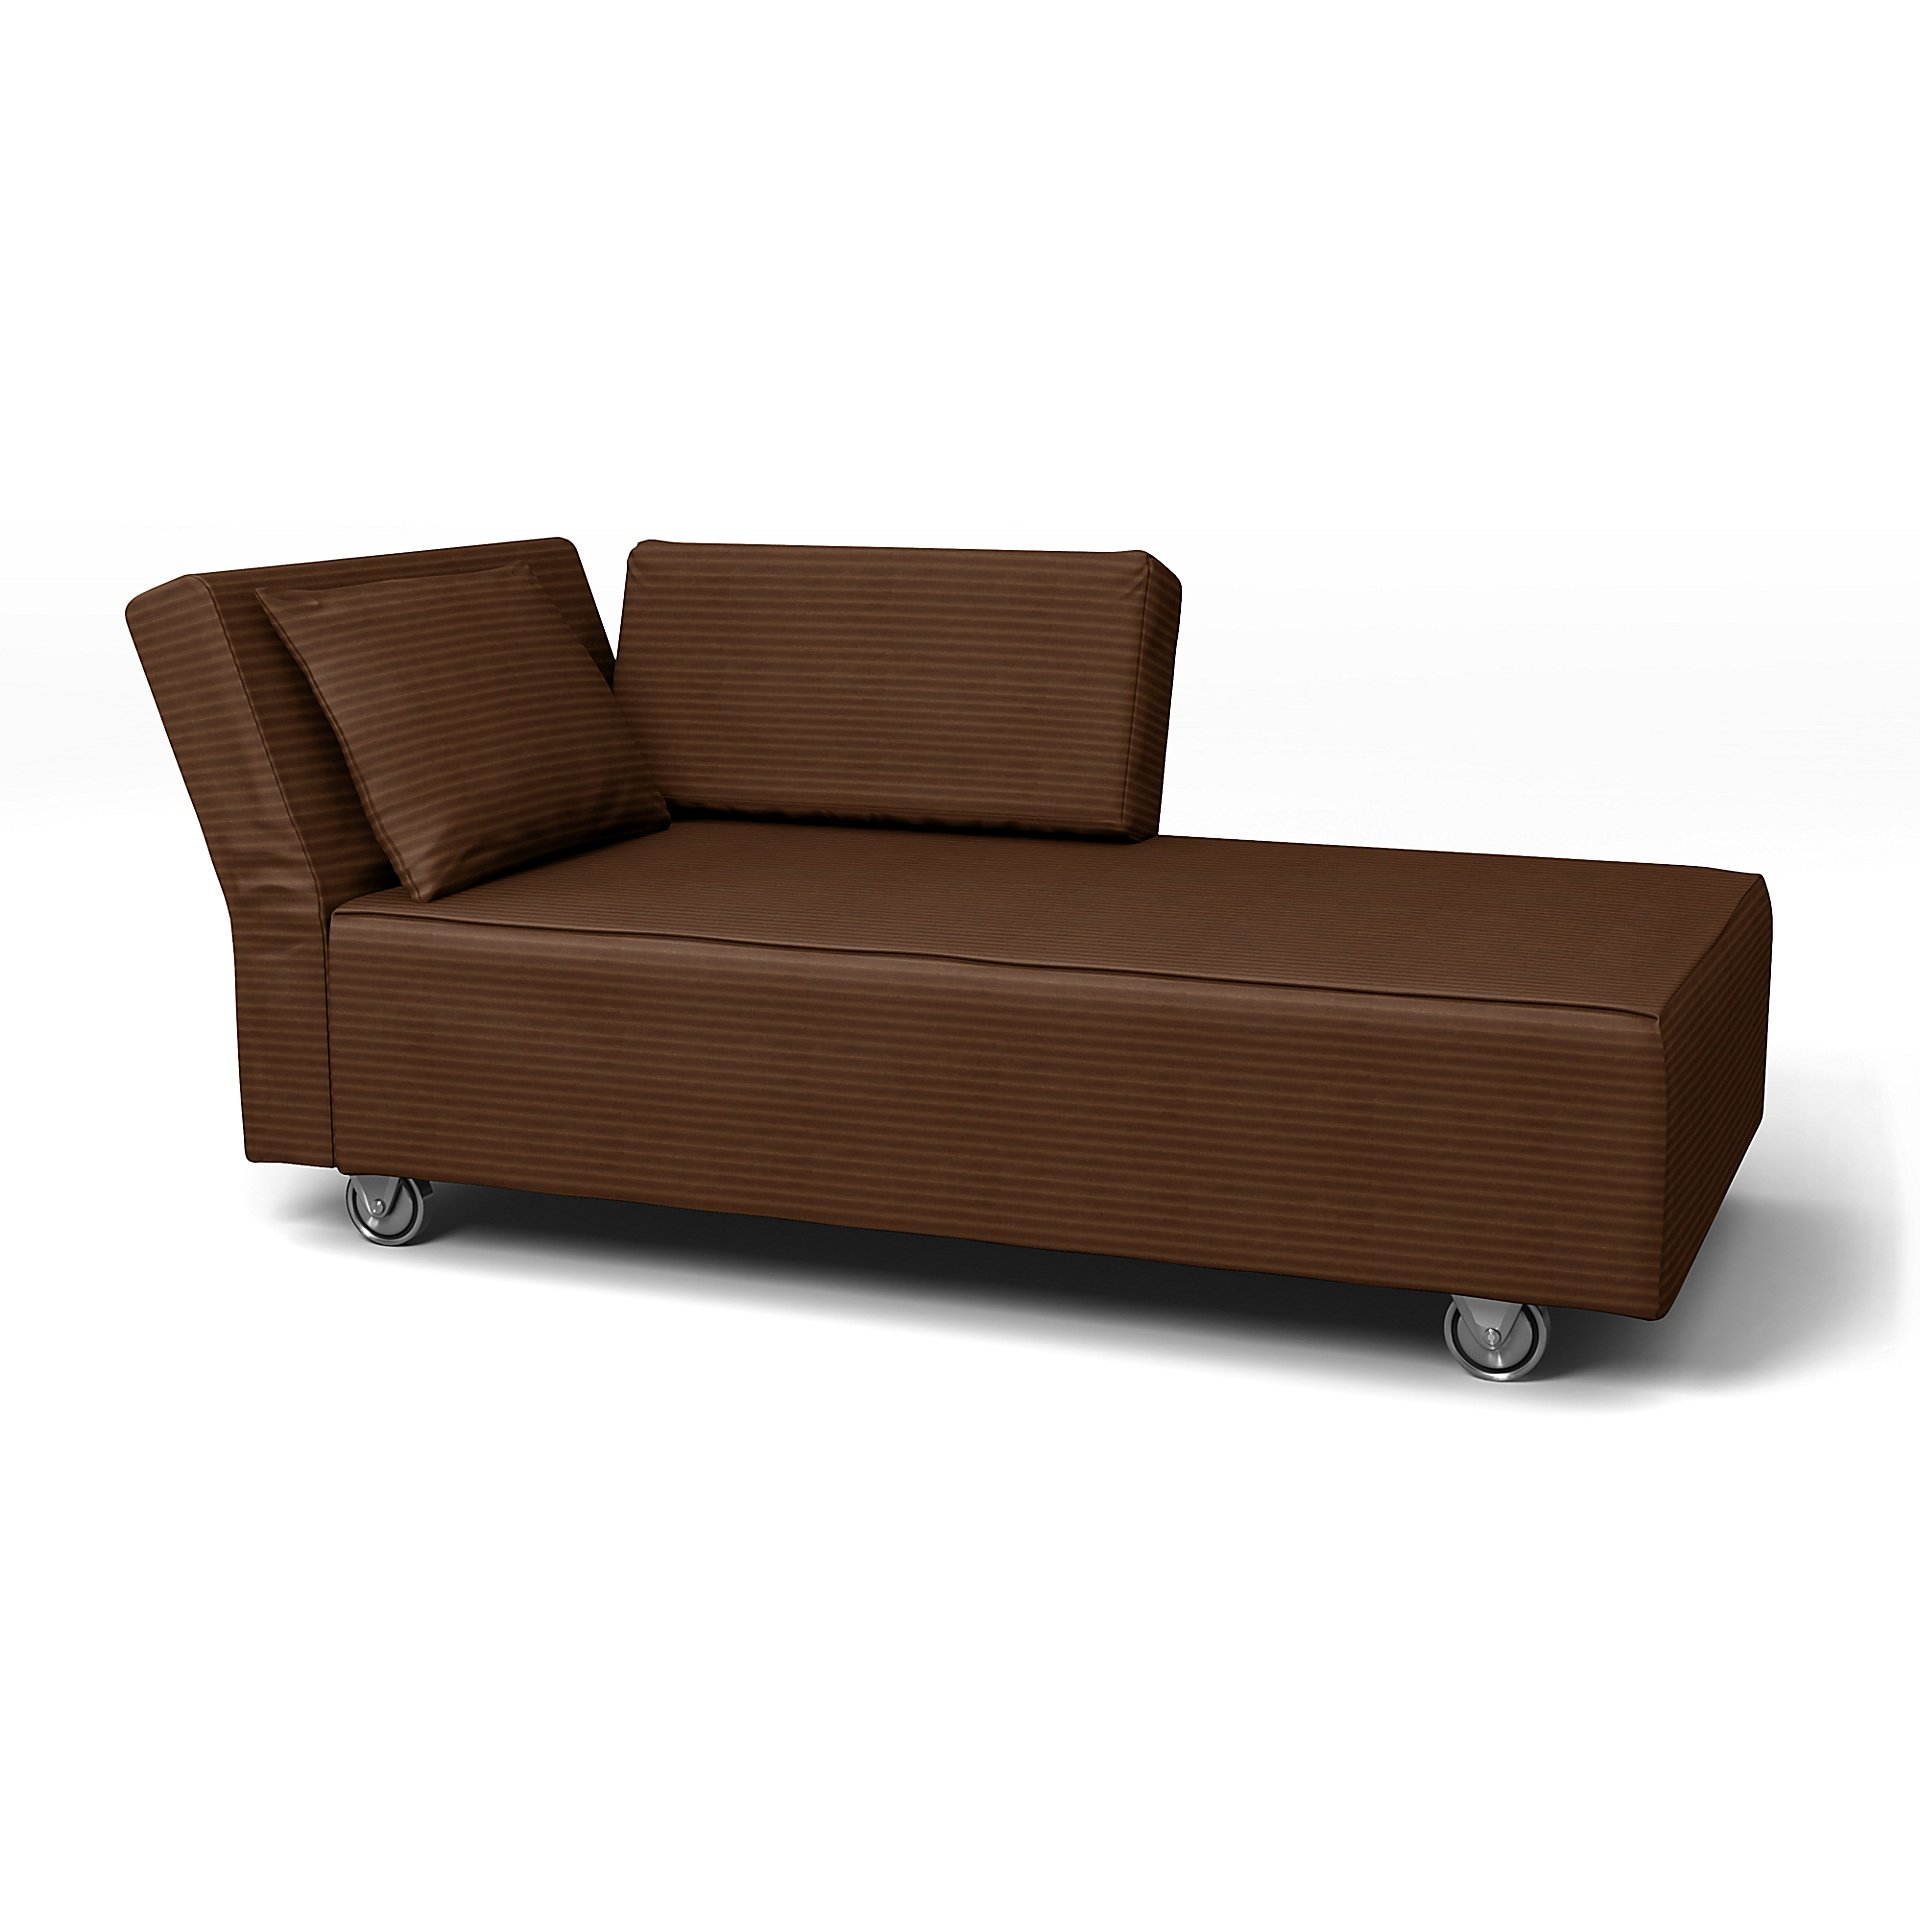 IKEA - Falsterbo Chaise with Left Armrest Cover, Chocolate Brown, Corduroy - Bemz